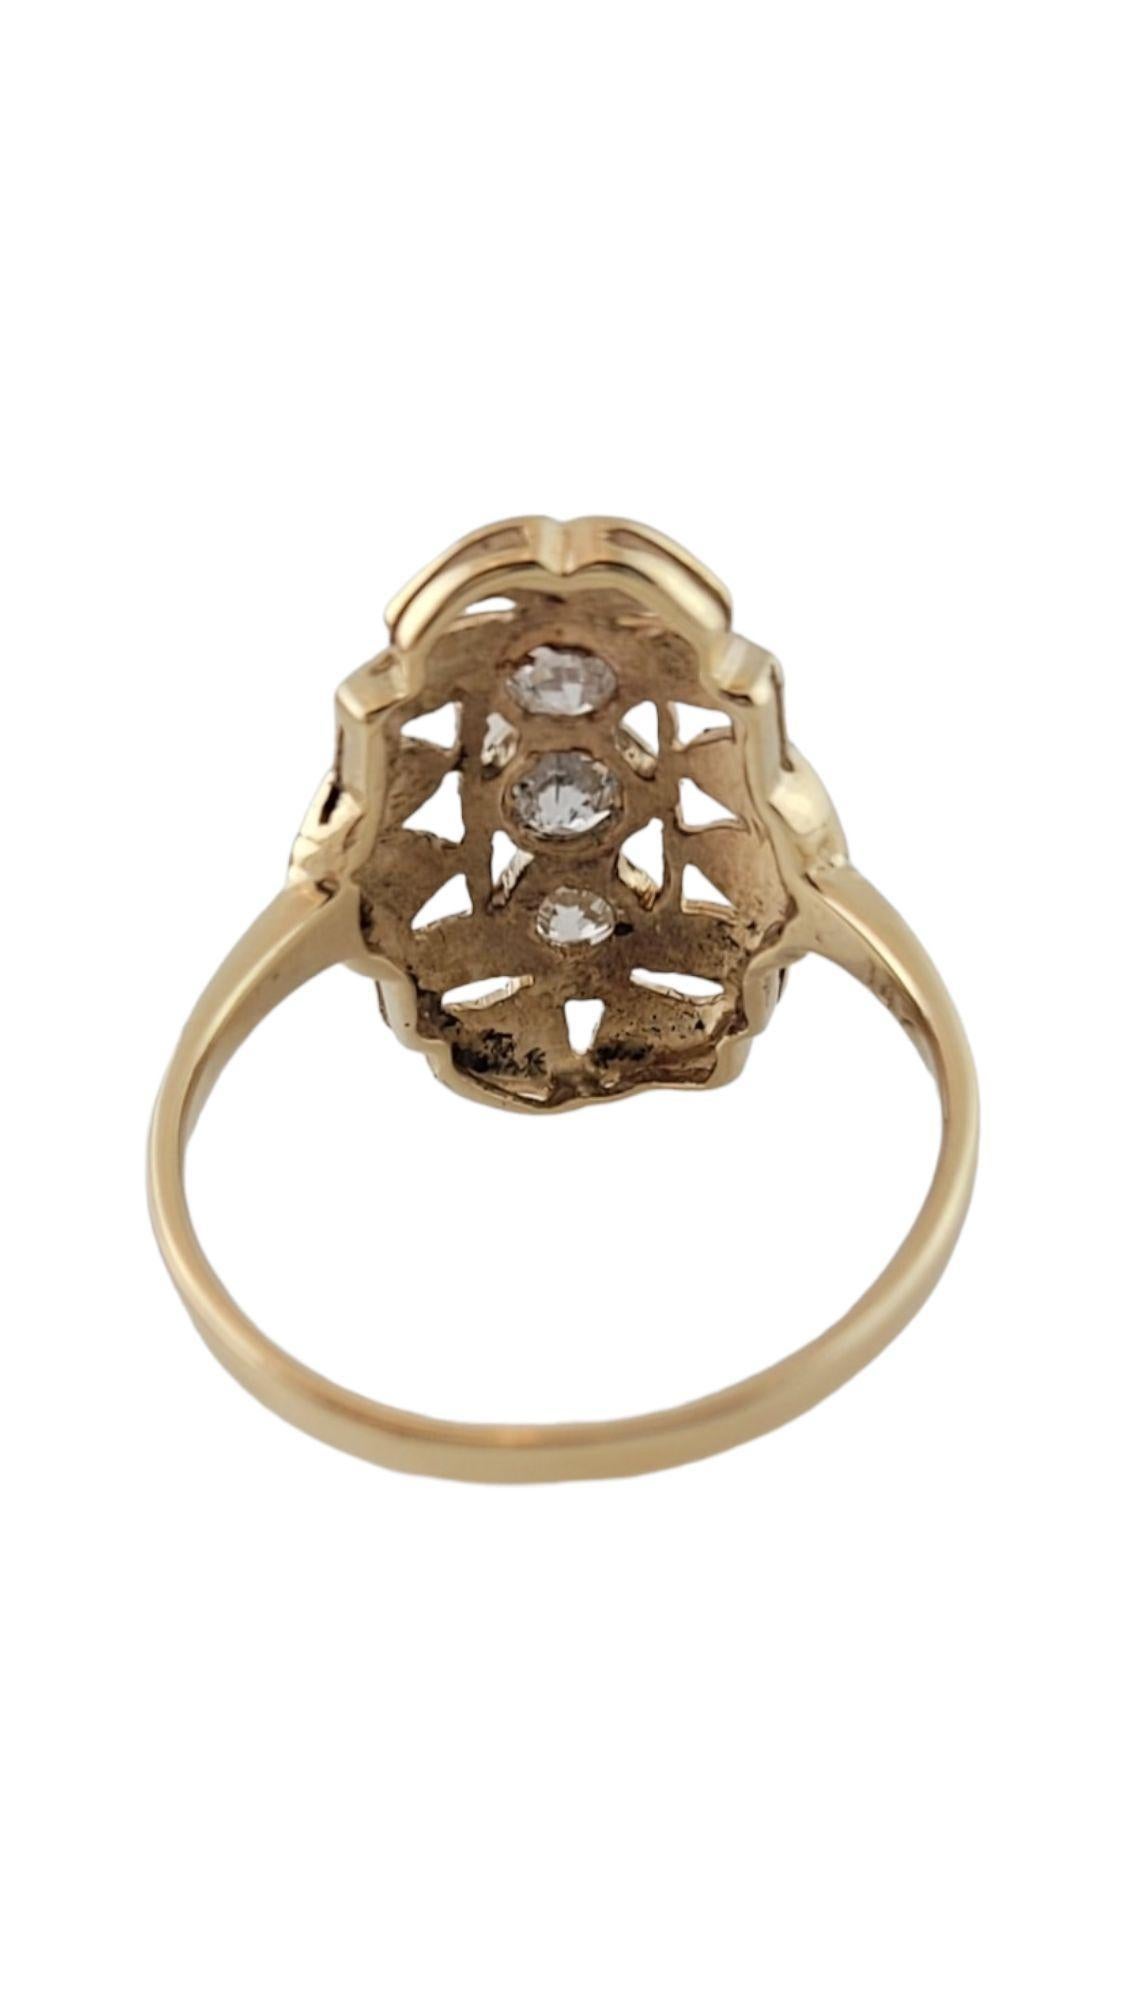 Women's Antique 14K Yellow Gold Diamond Ring Size 6.75 #14989 For Sale